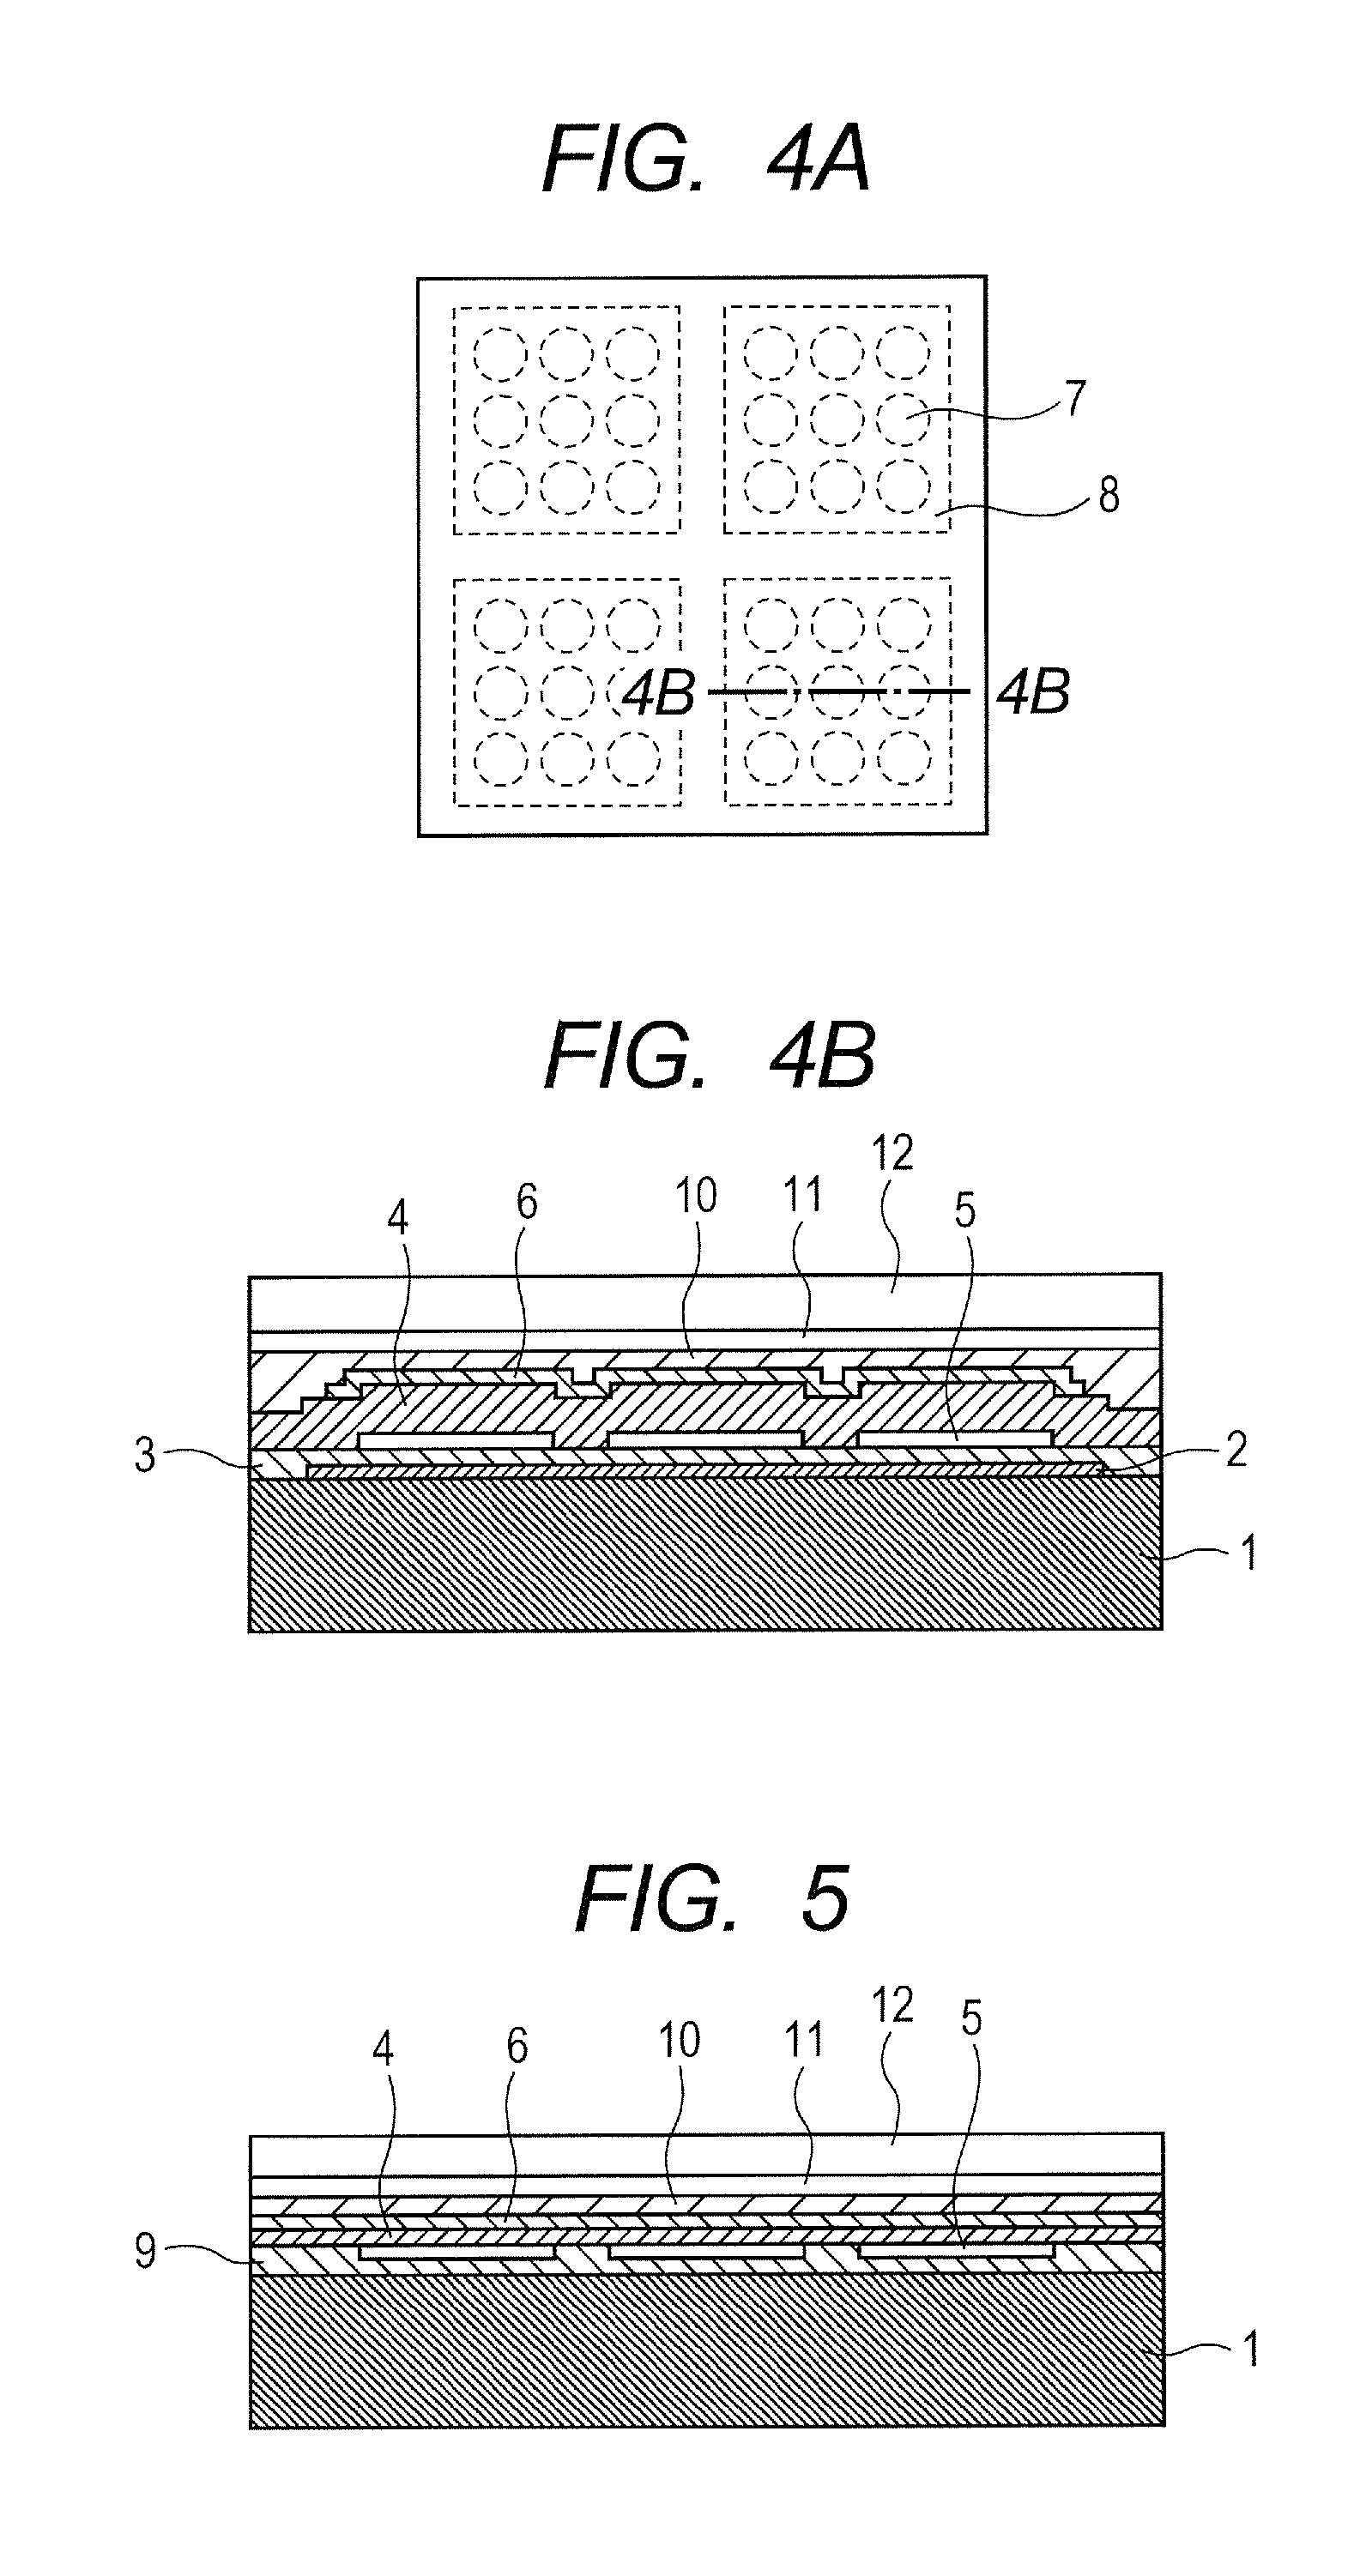 Probe and object information acquisition apparatus using the same